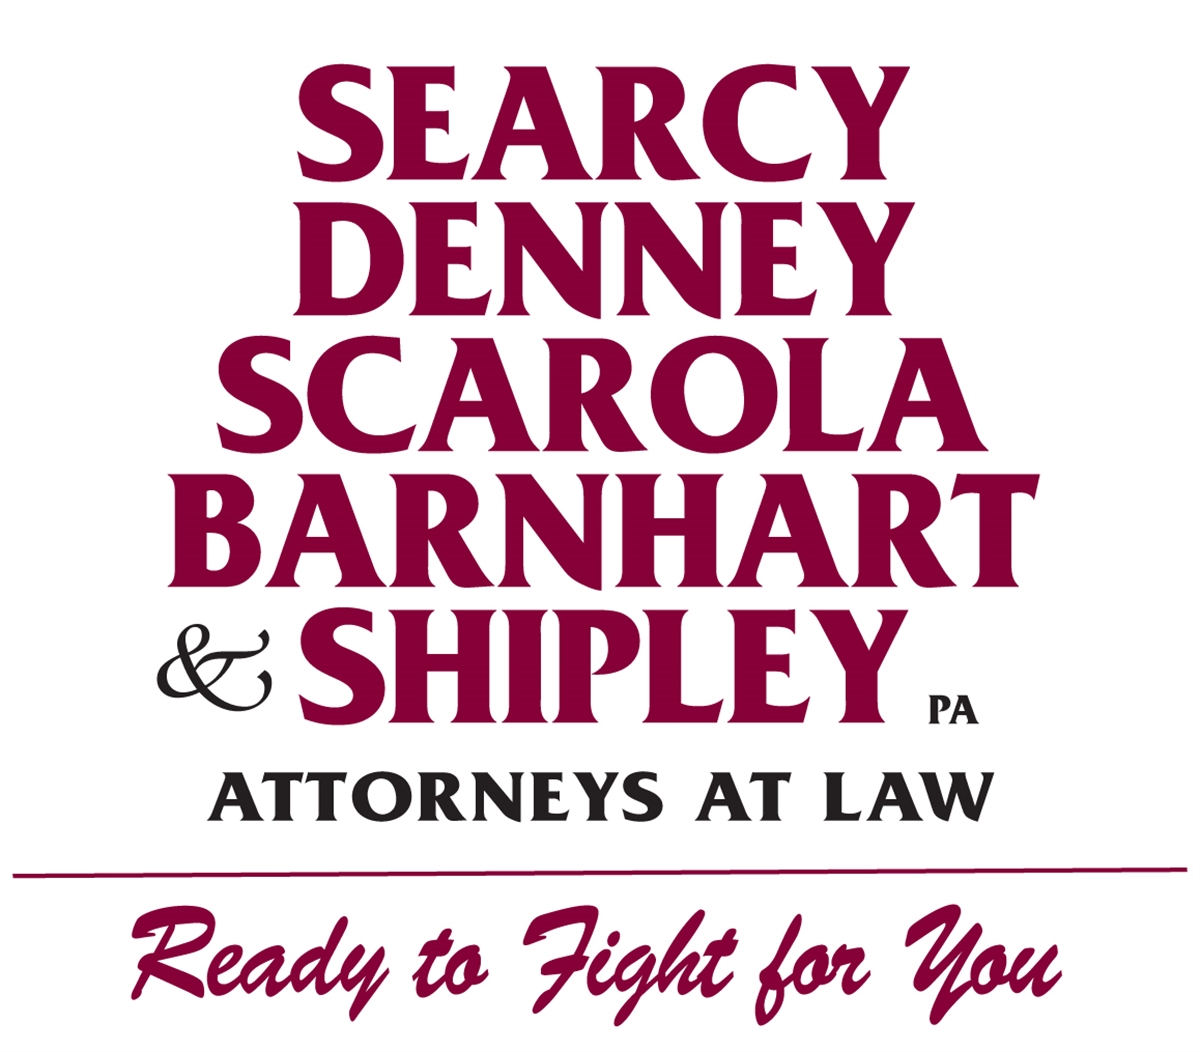 Pain and Suffering: The Mental Damage Caused By Auto Accidents | Searcy Denney Scarola Barnhart & Shipley